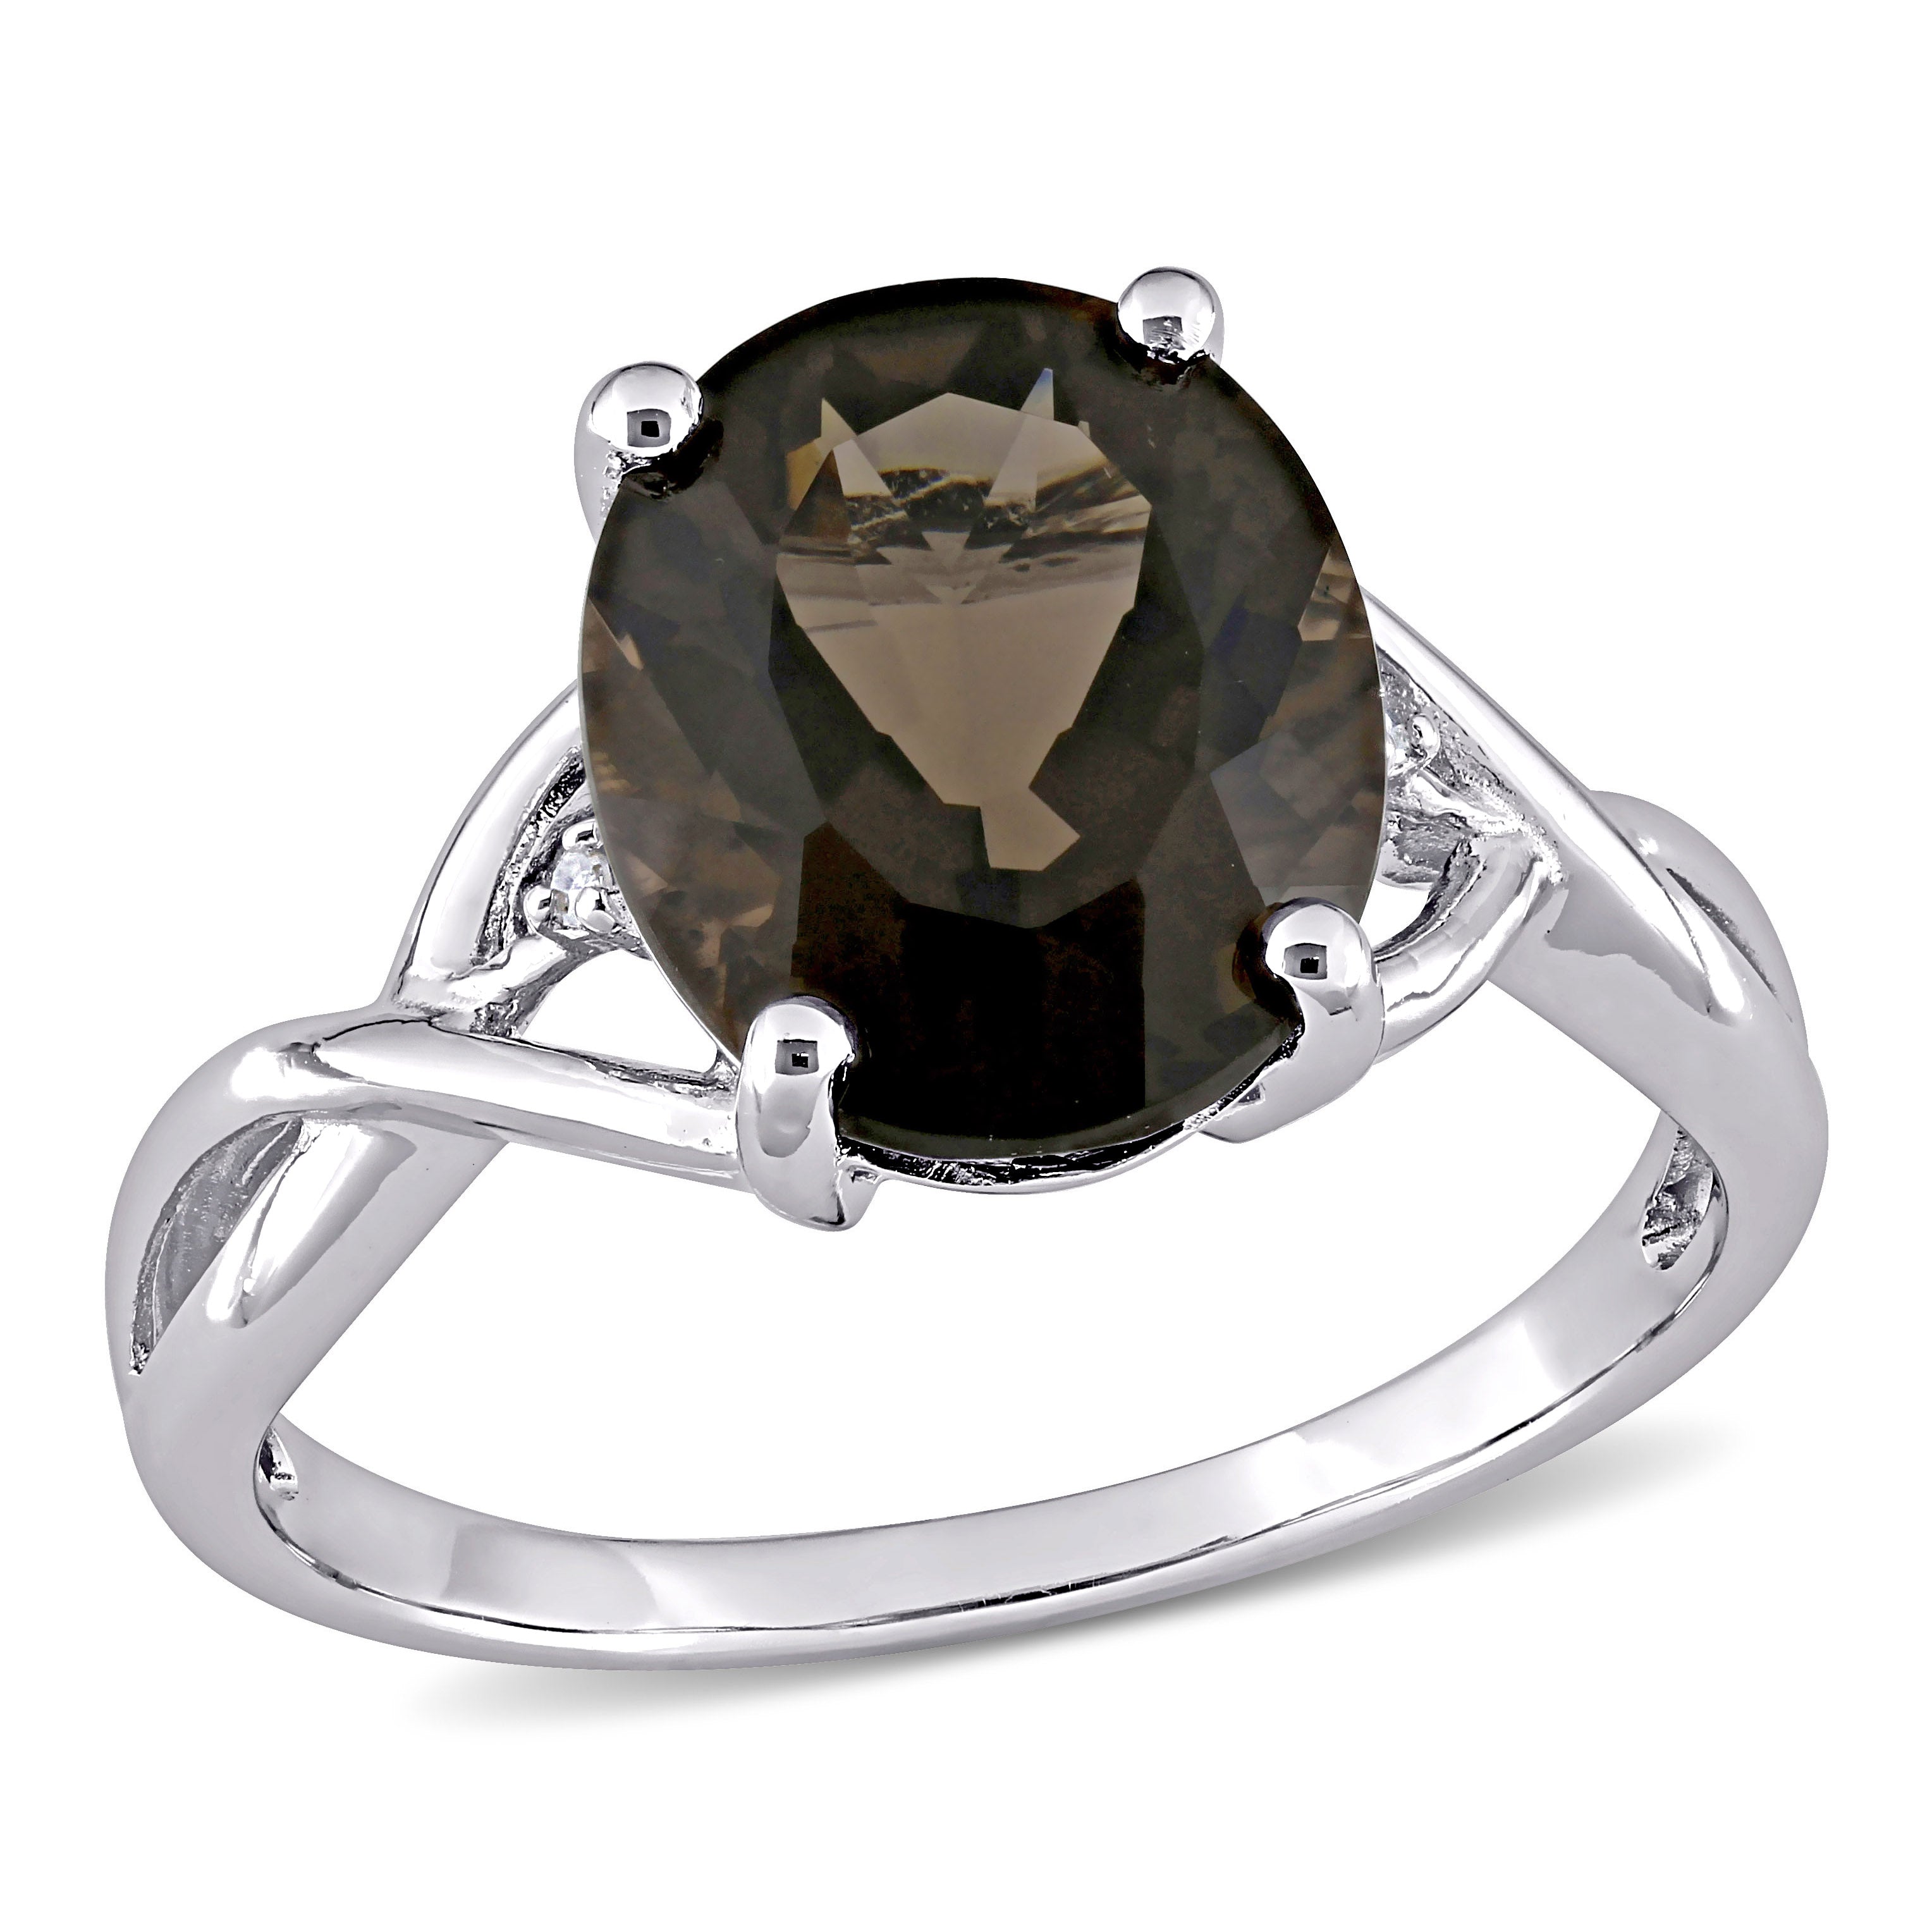 Mimi & Max 3 3/4ct Tgw Oval-cut Smokey Quartz And Diamond Accent Ring In Sterling Silver In Brown